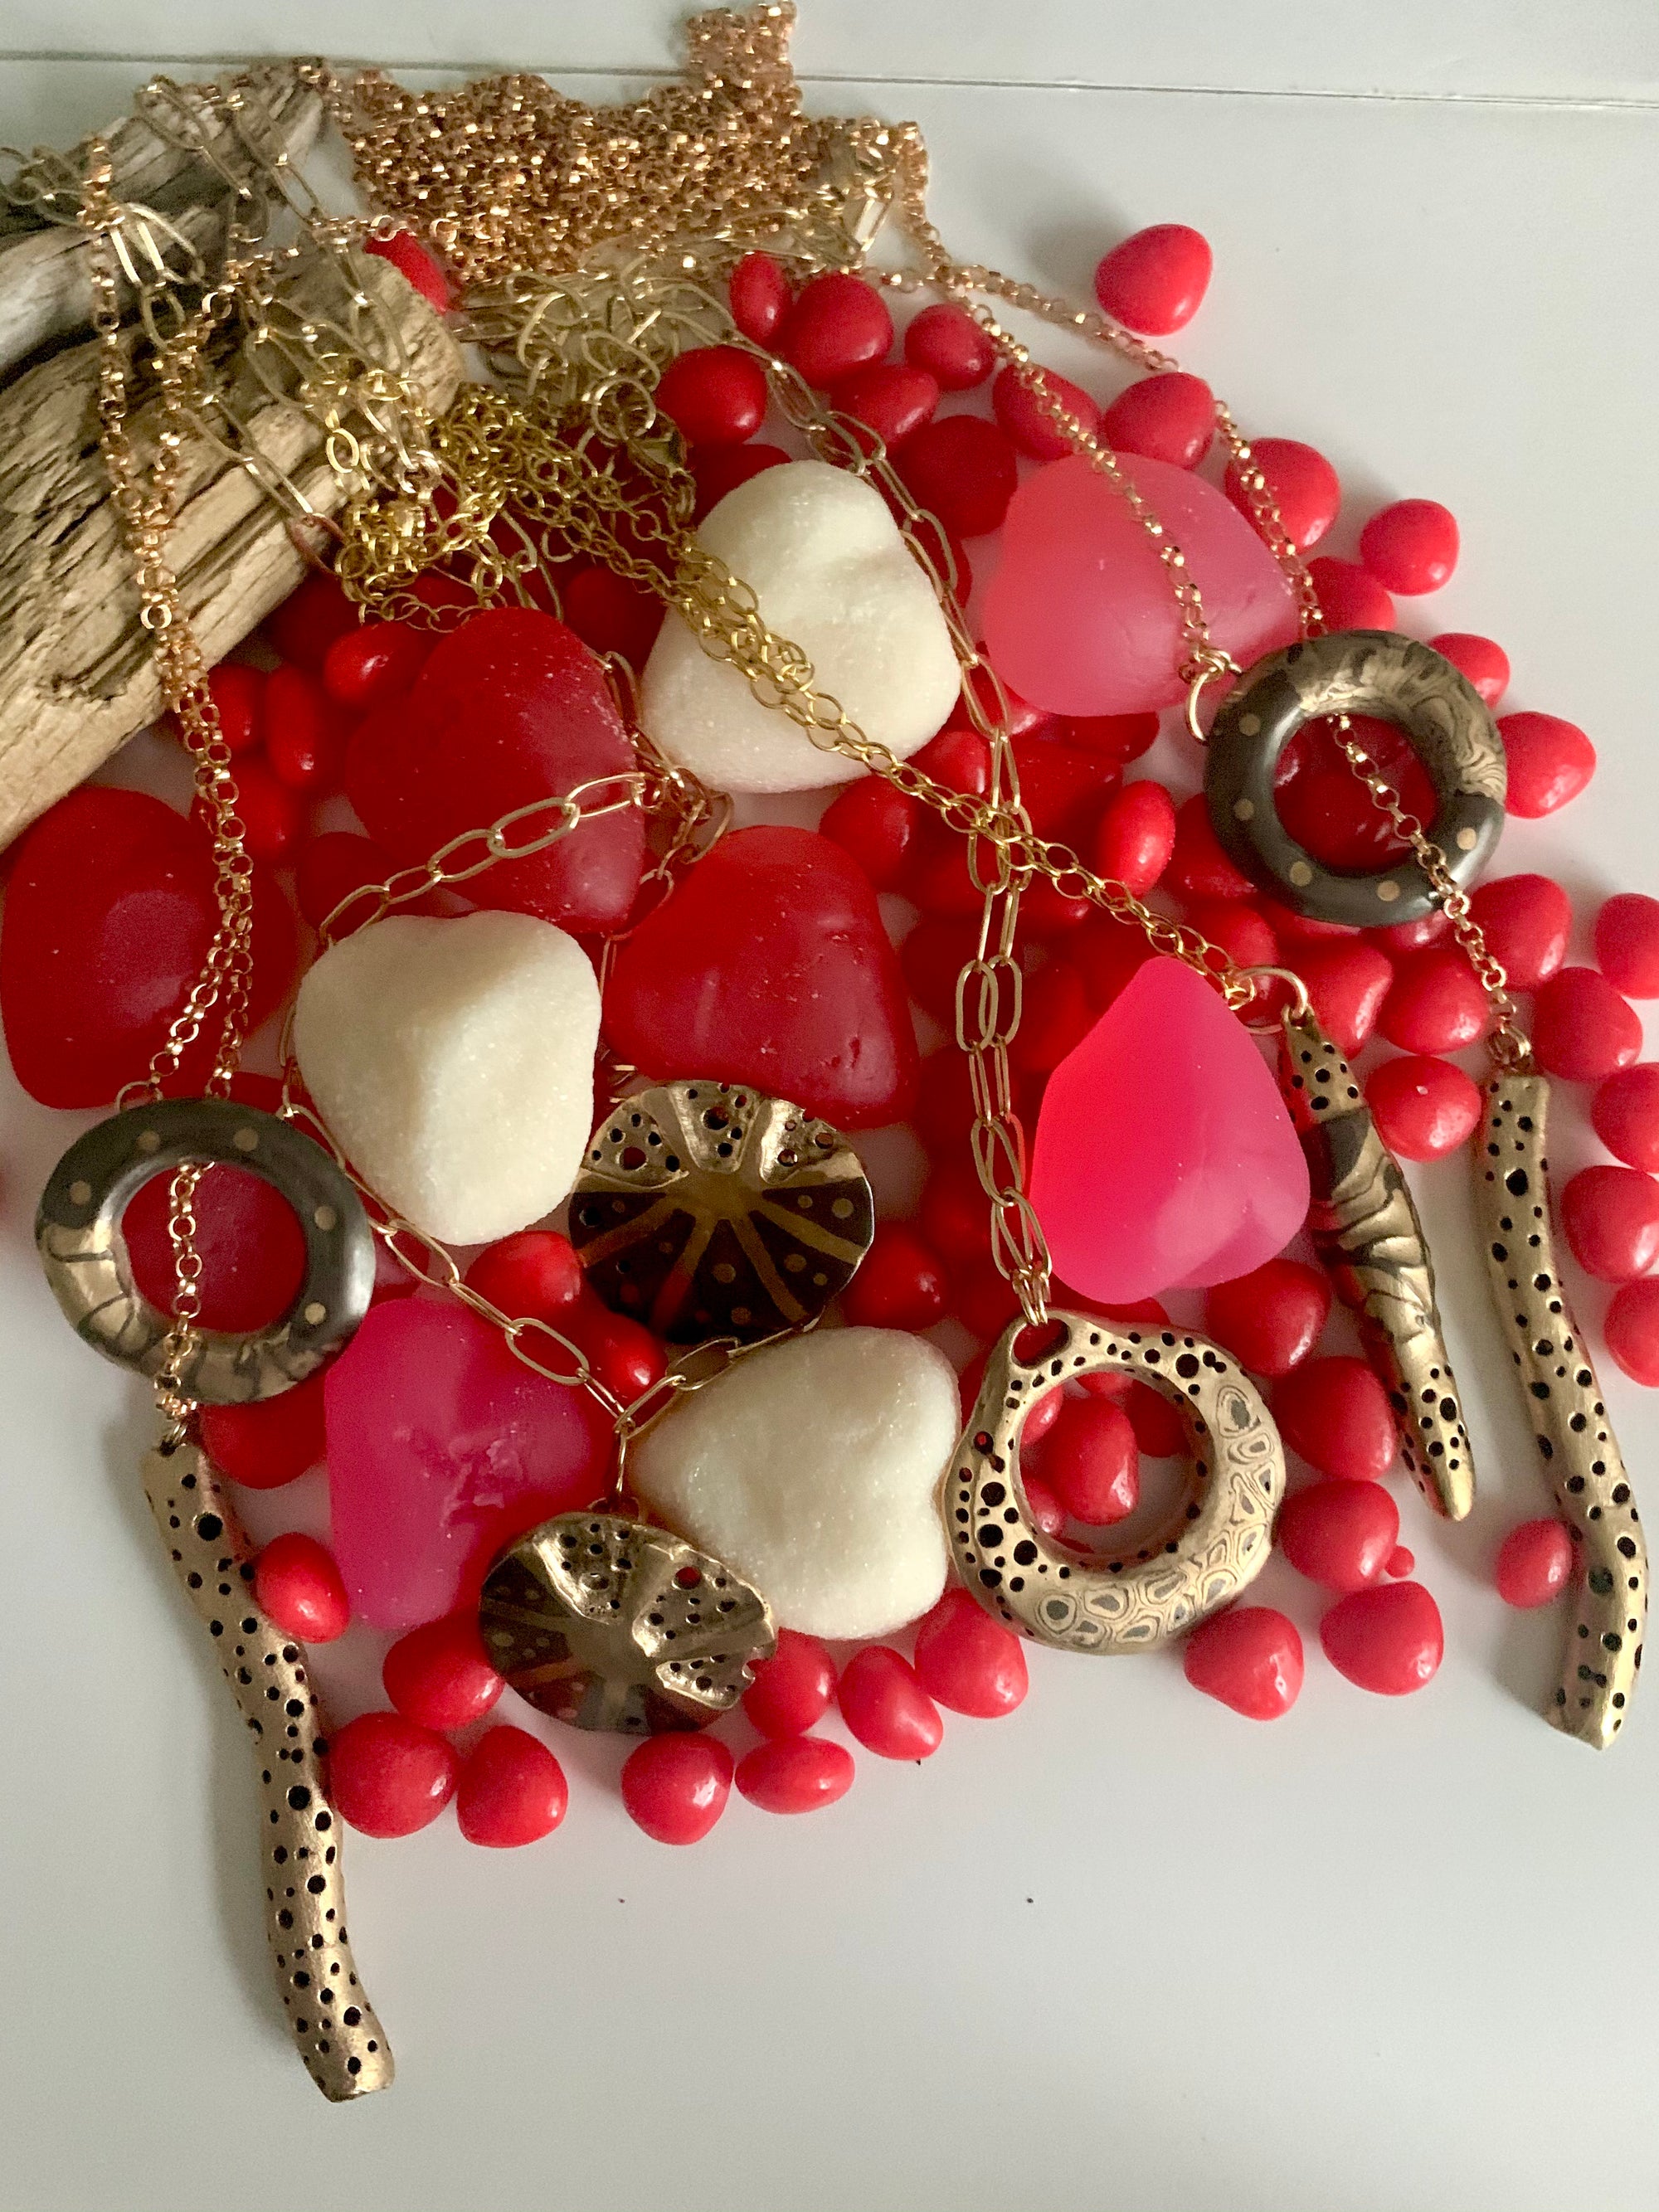 Handmade art jewelry necklaces for giving on valentines